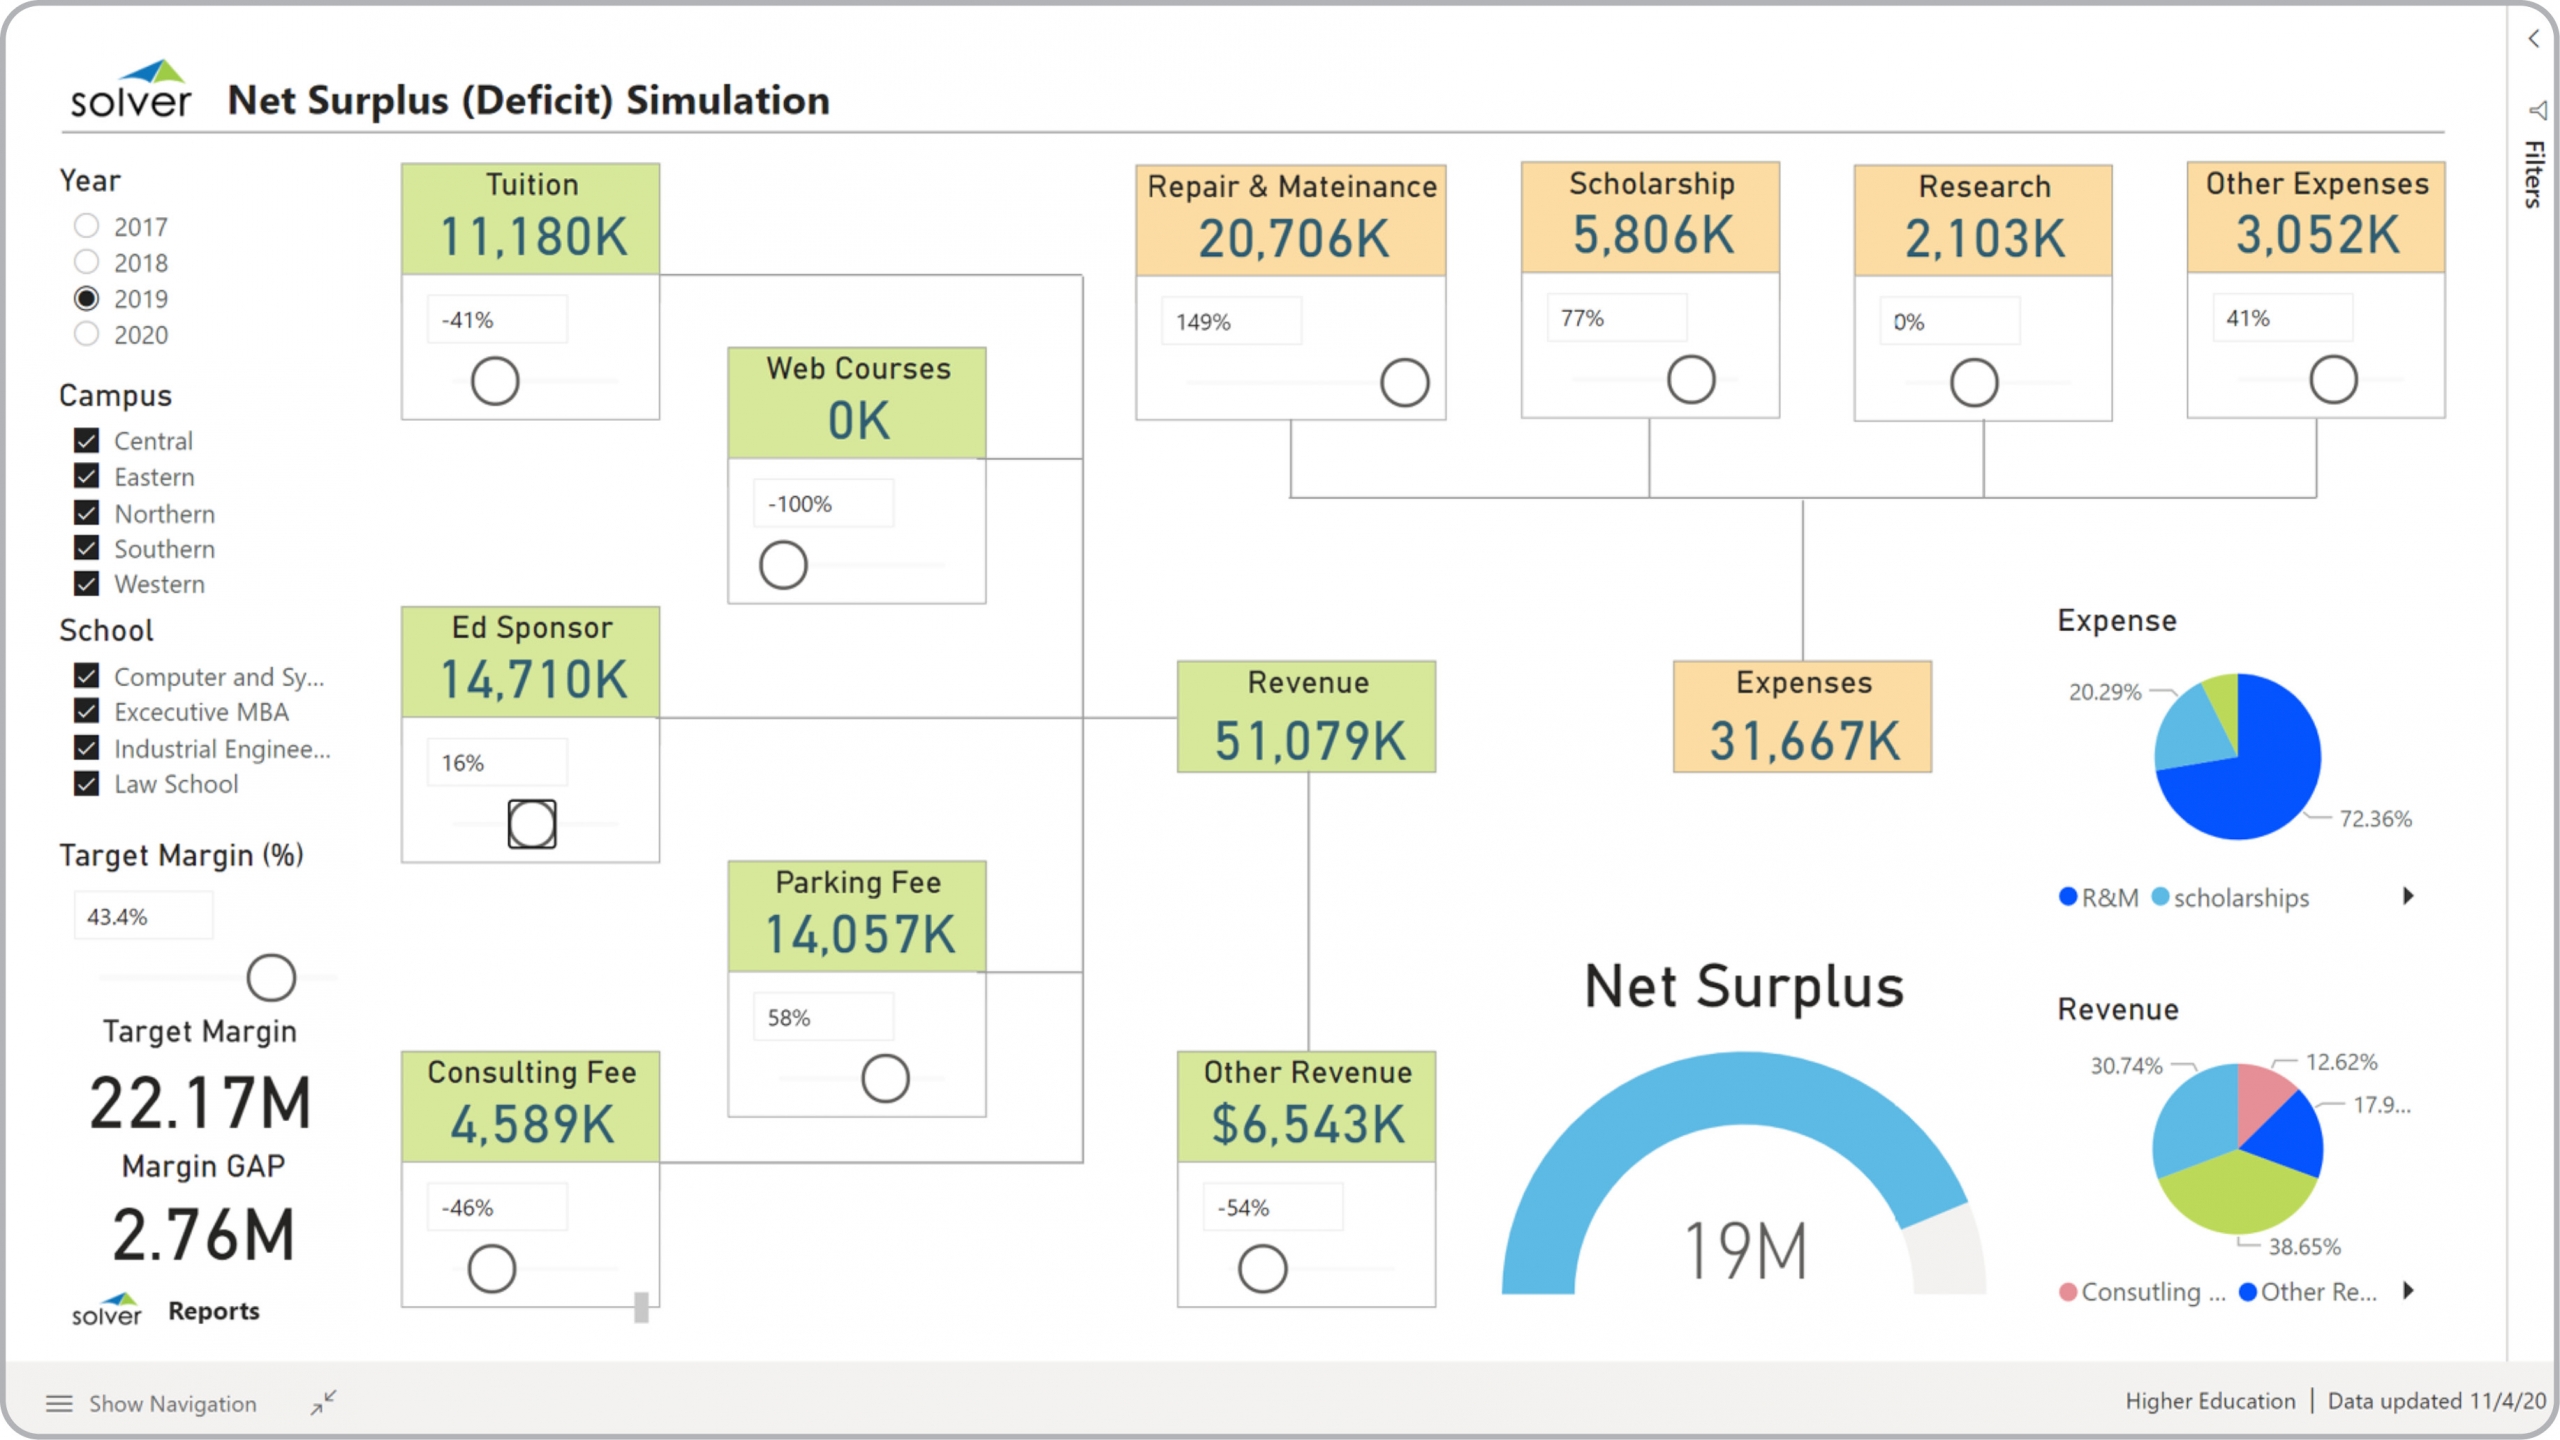 Example of a Financial Simulation Dashboard for Higher Education Institutions